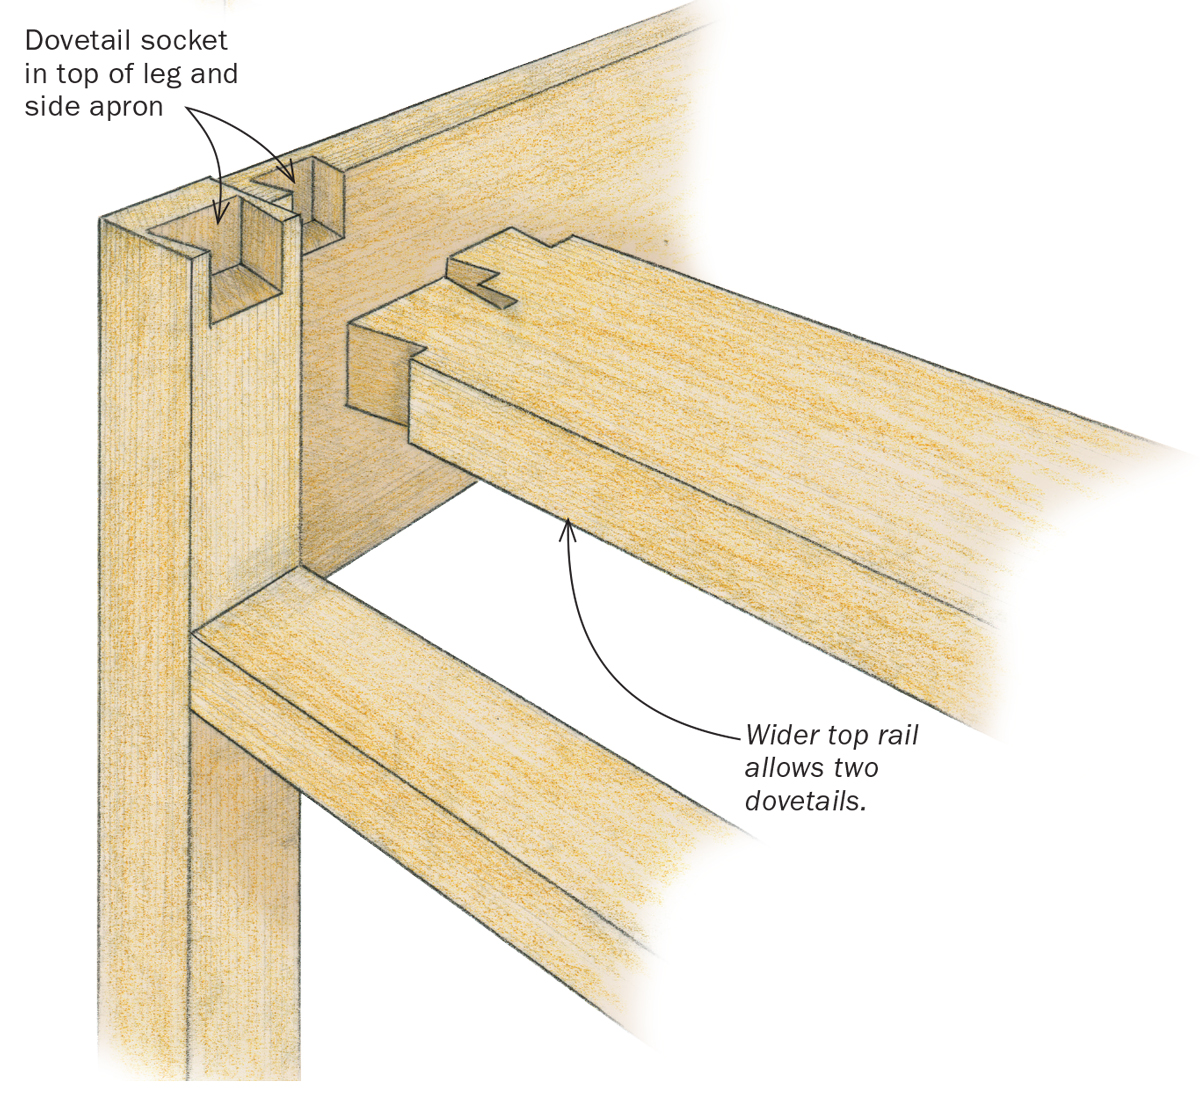  Double lapped dovetail is even stronger